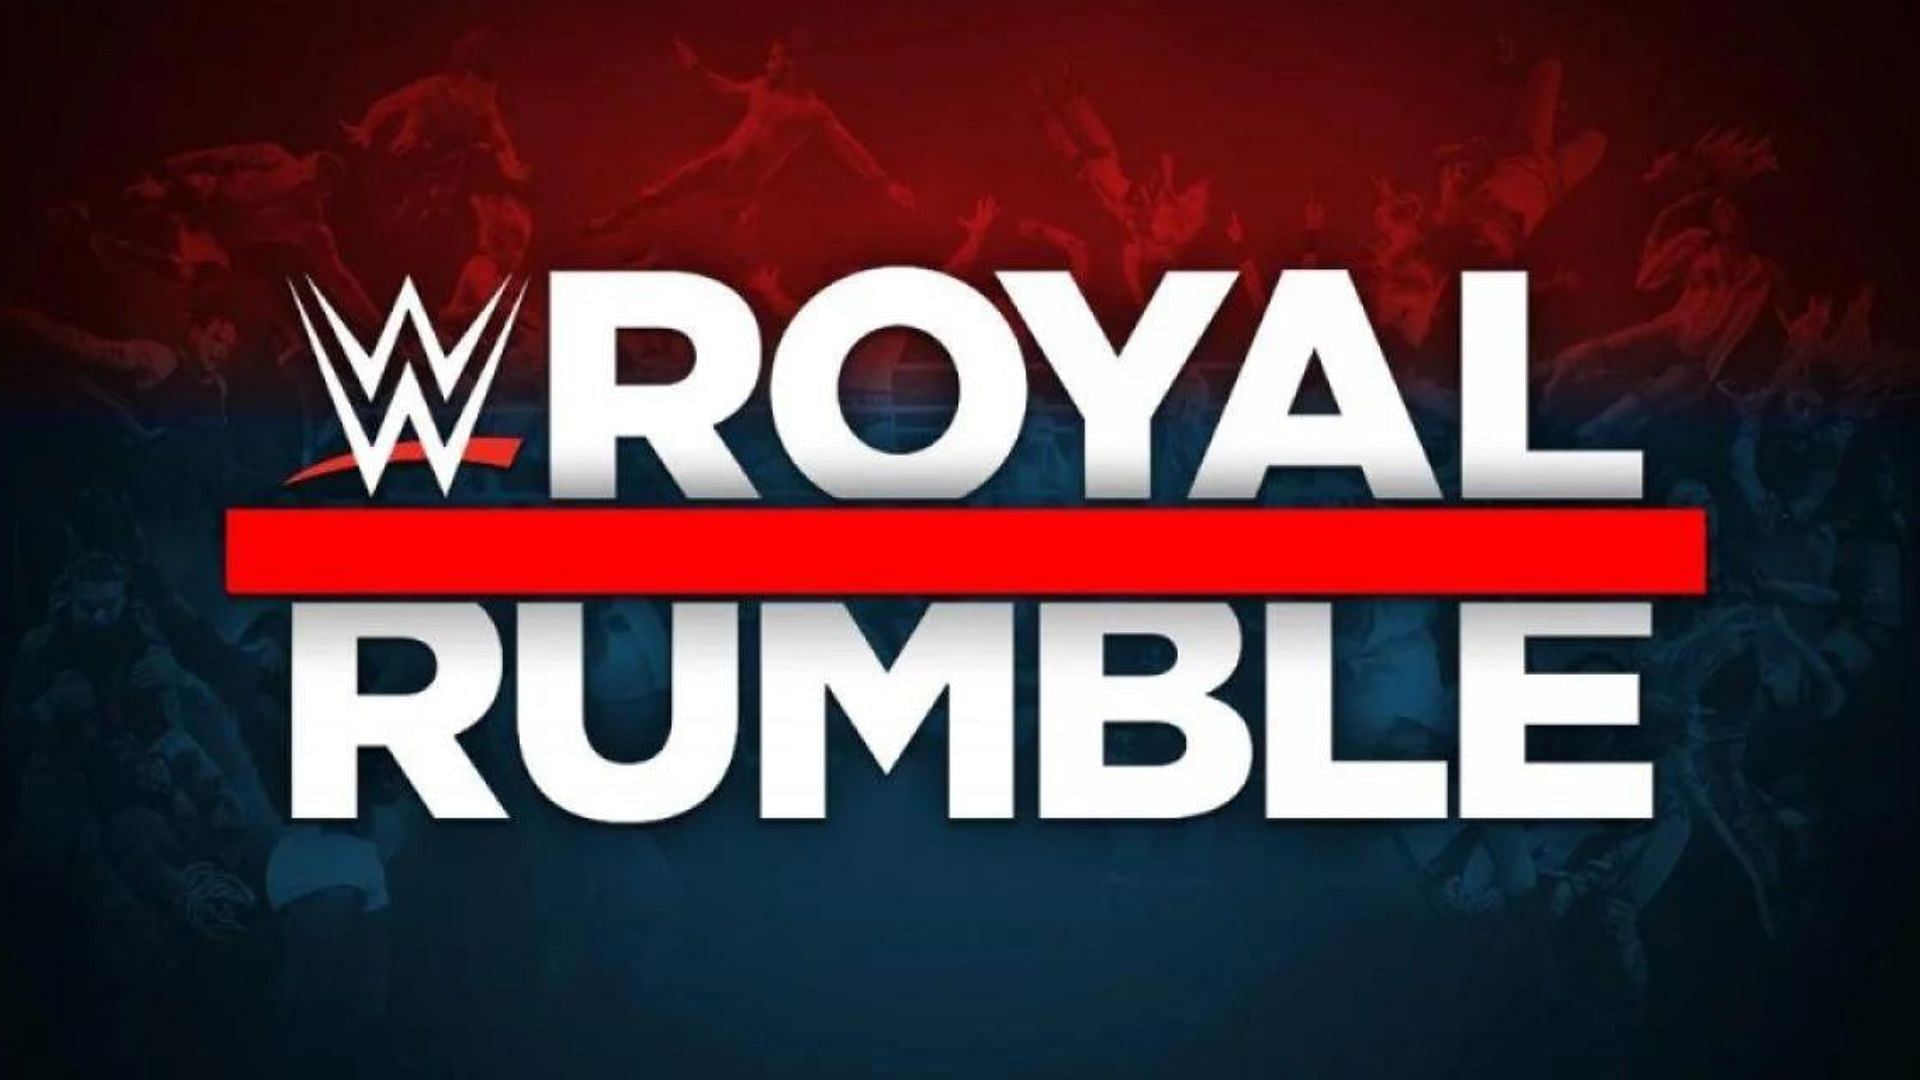 WWE Royal Rumble takes place on 28th January, 2023